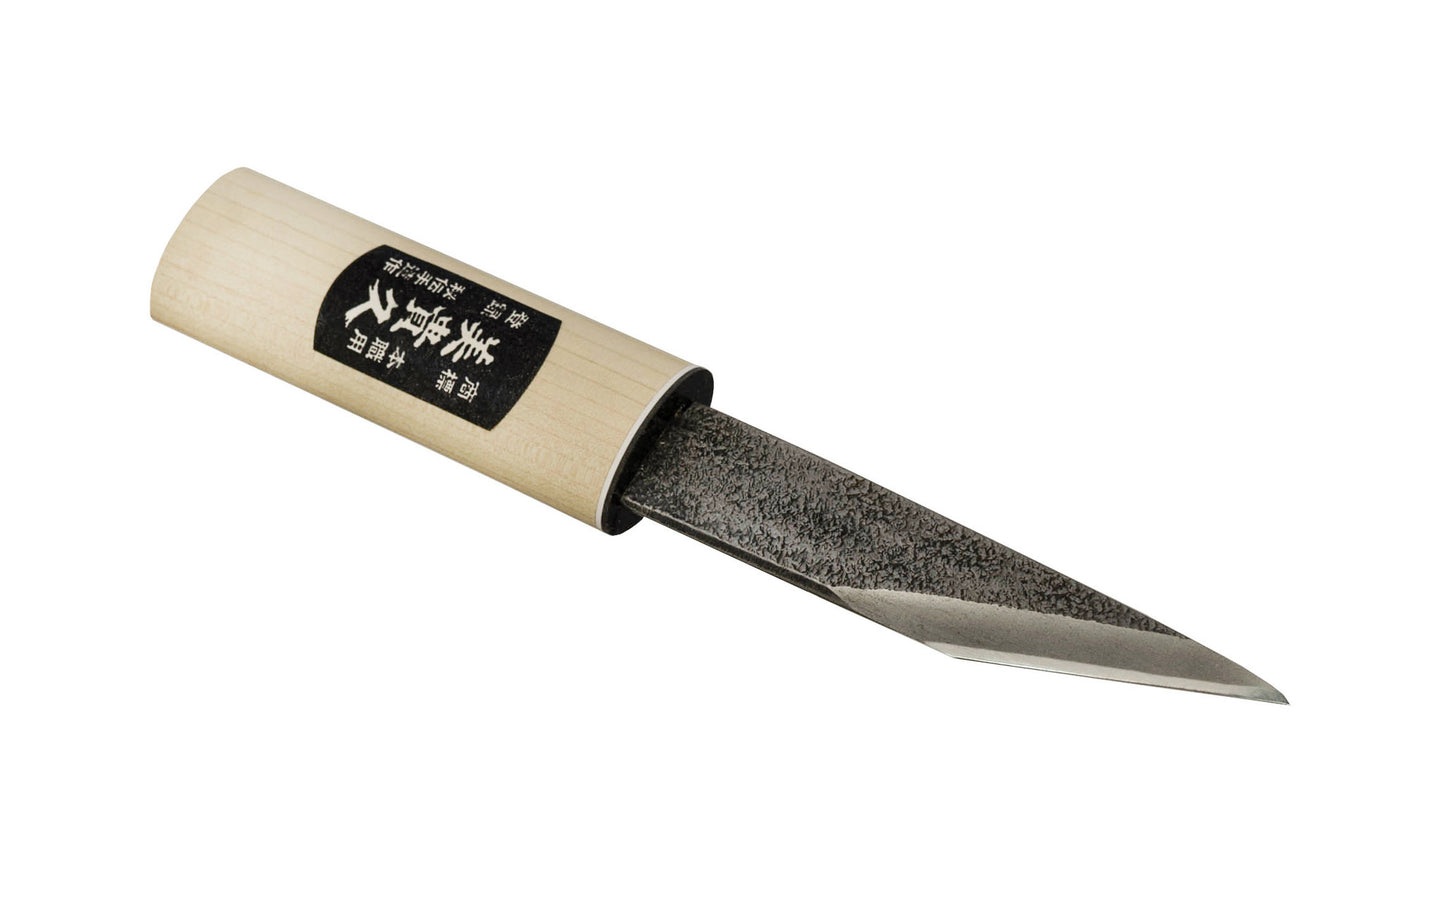 Yokote Japanese Laminated Steel Knife ~ 120 mm ~ Made in Japan · Made of Shirogami White 1.05-1.15% high carbon steel ~ Very pure steel hardened to 64HRC~ Right hand bevel cutting edge~ Fixed blade into handle